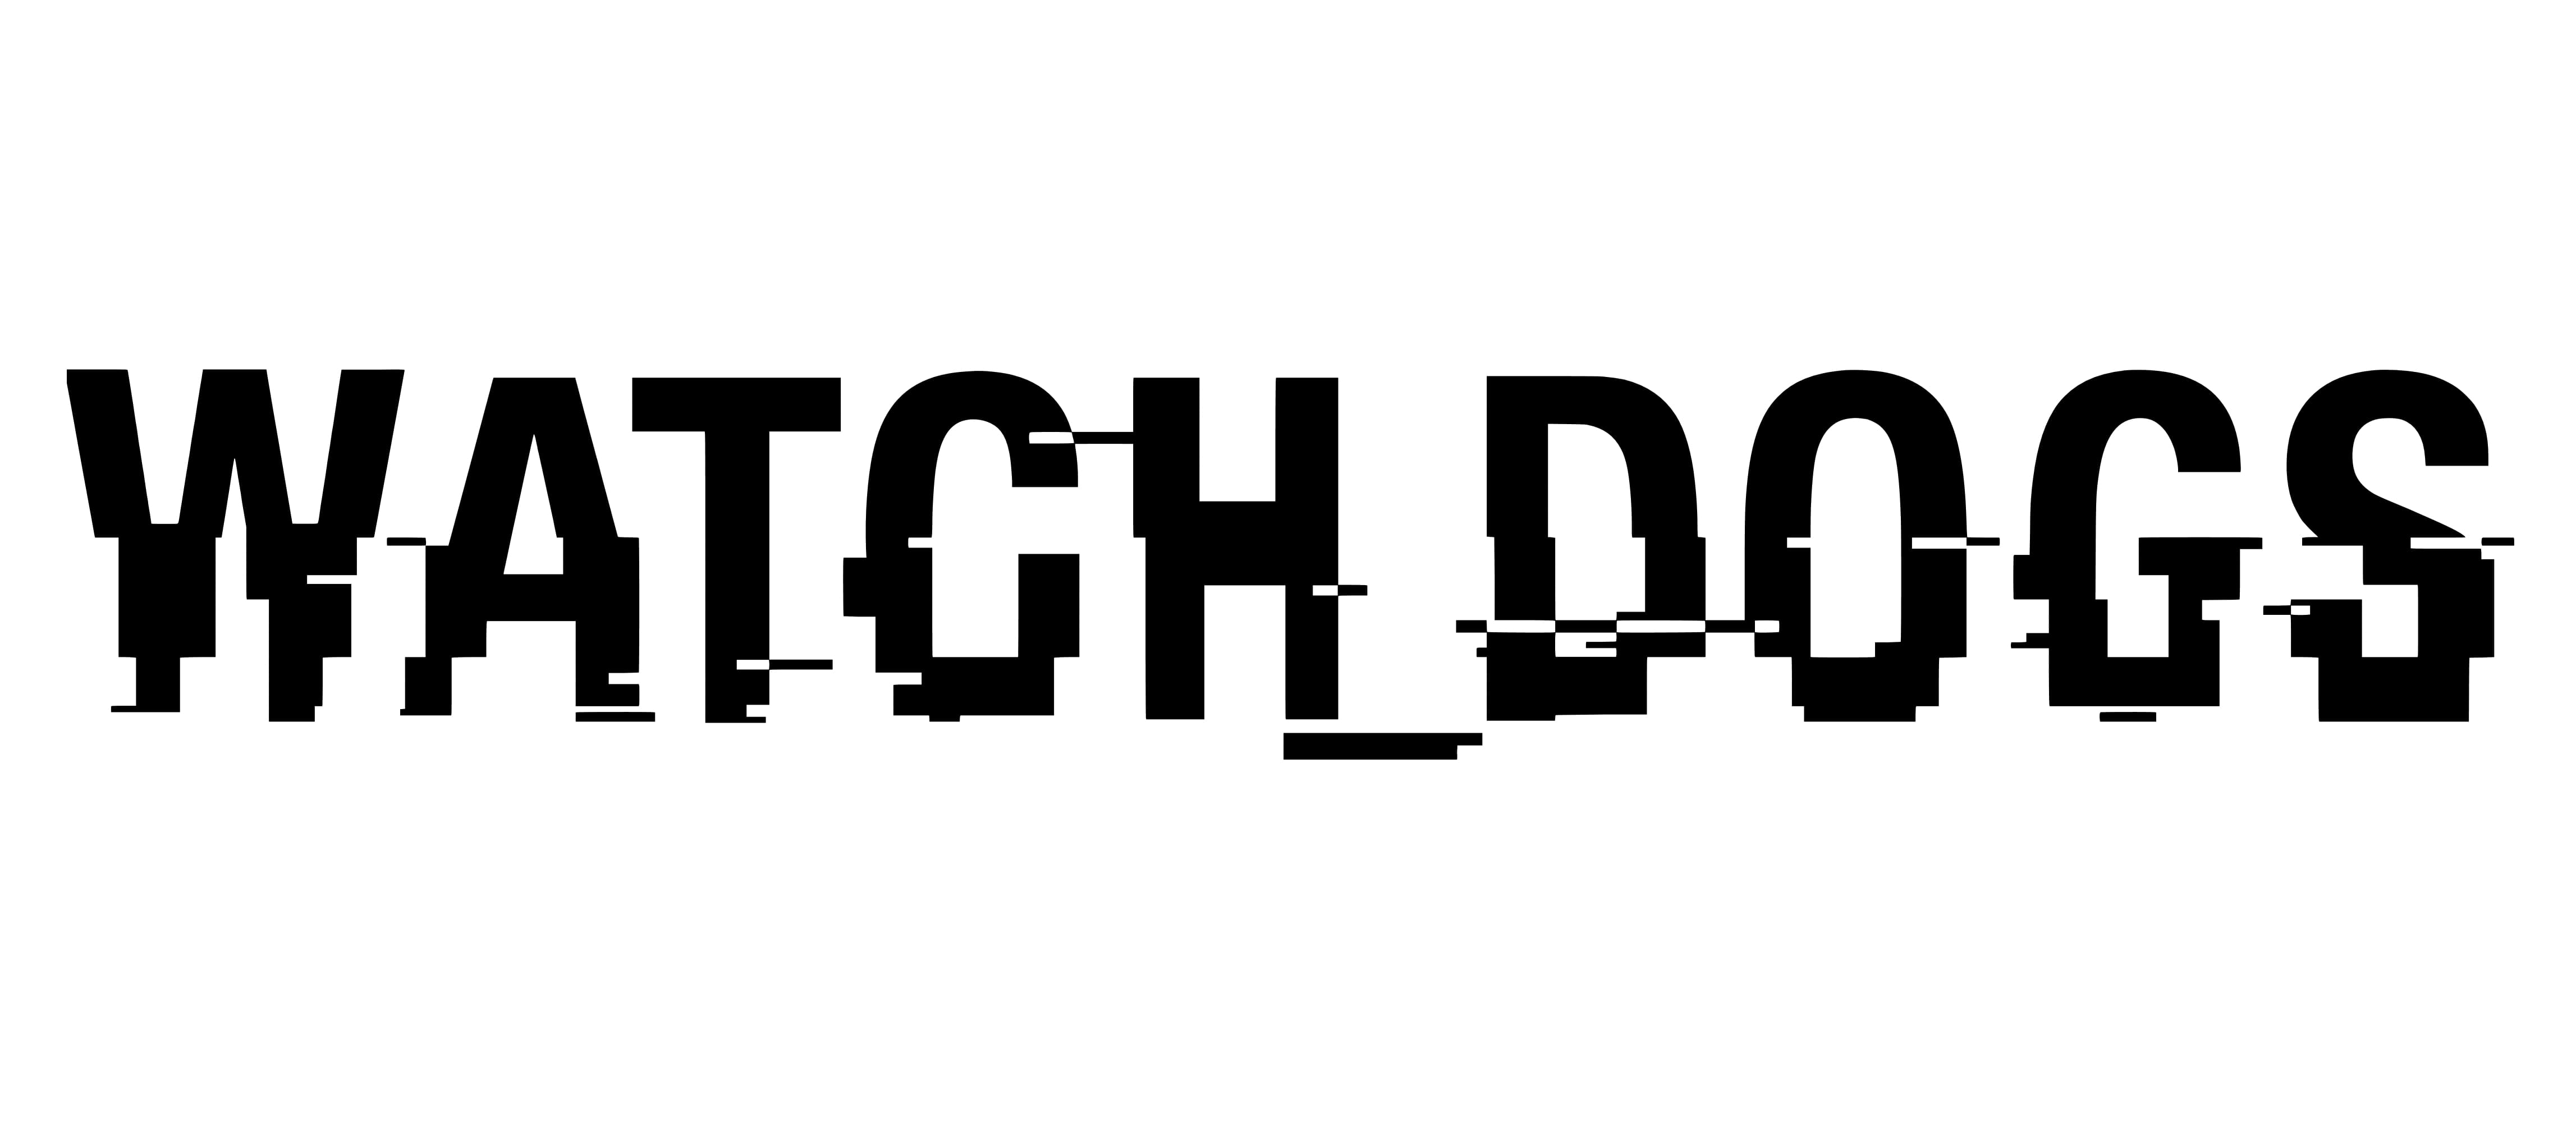 Detail Watch Dogs Font Nomer 14